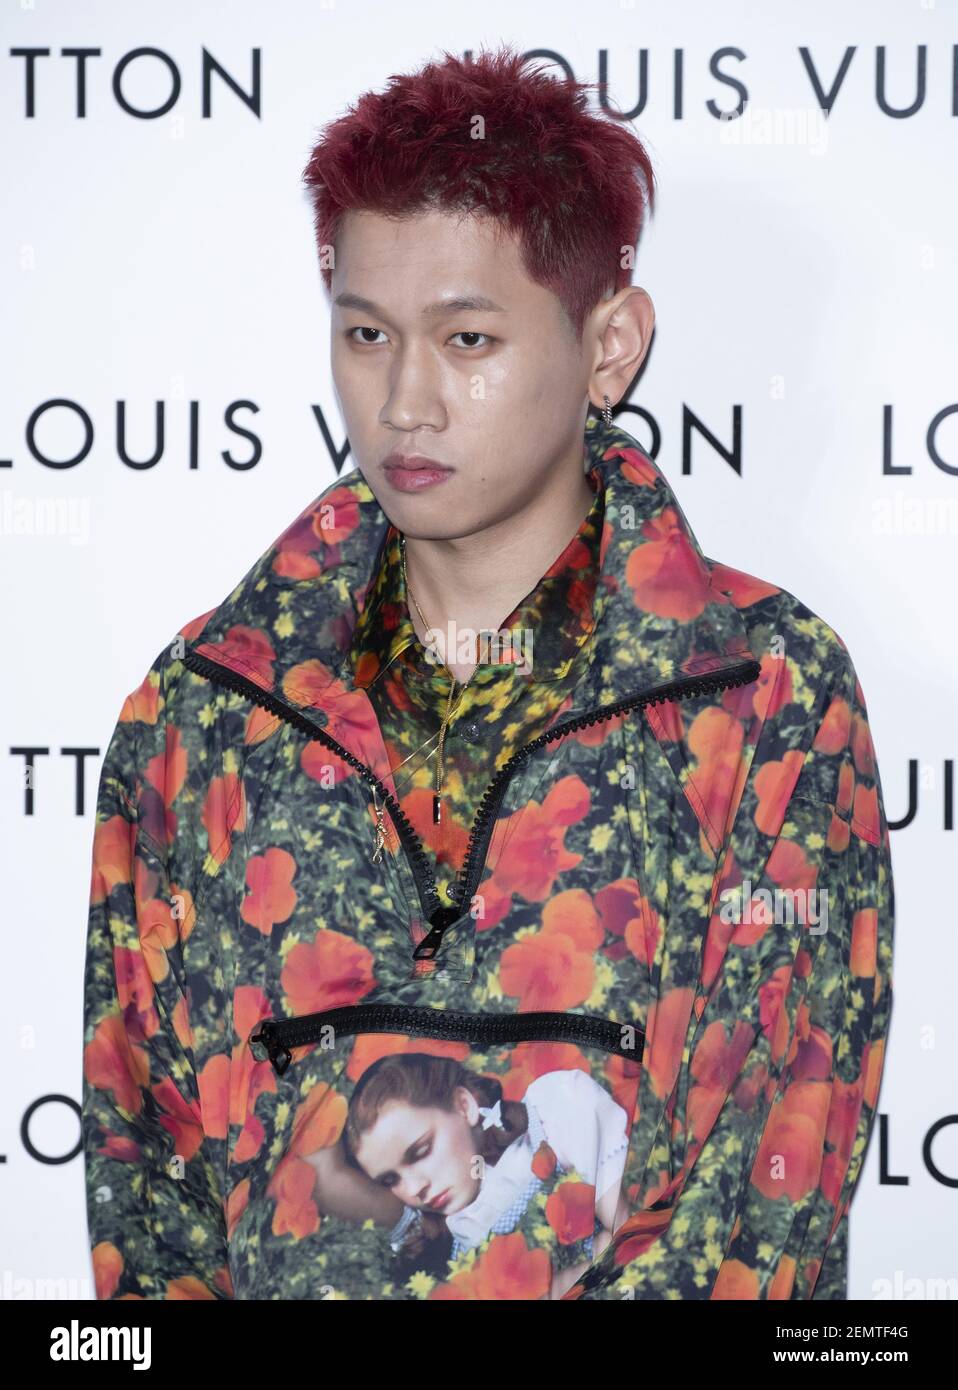 South Korean R B And Hip Hop Singer Crush Attends A Photo Call For The French Luxury Fashion Brand Louis Vuitton Pop Up Store Opening Ceremony In Seoul South Korea On April 10 2019